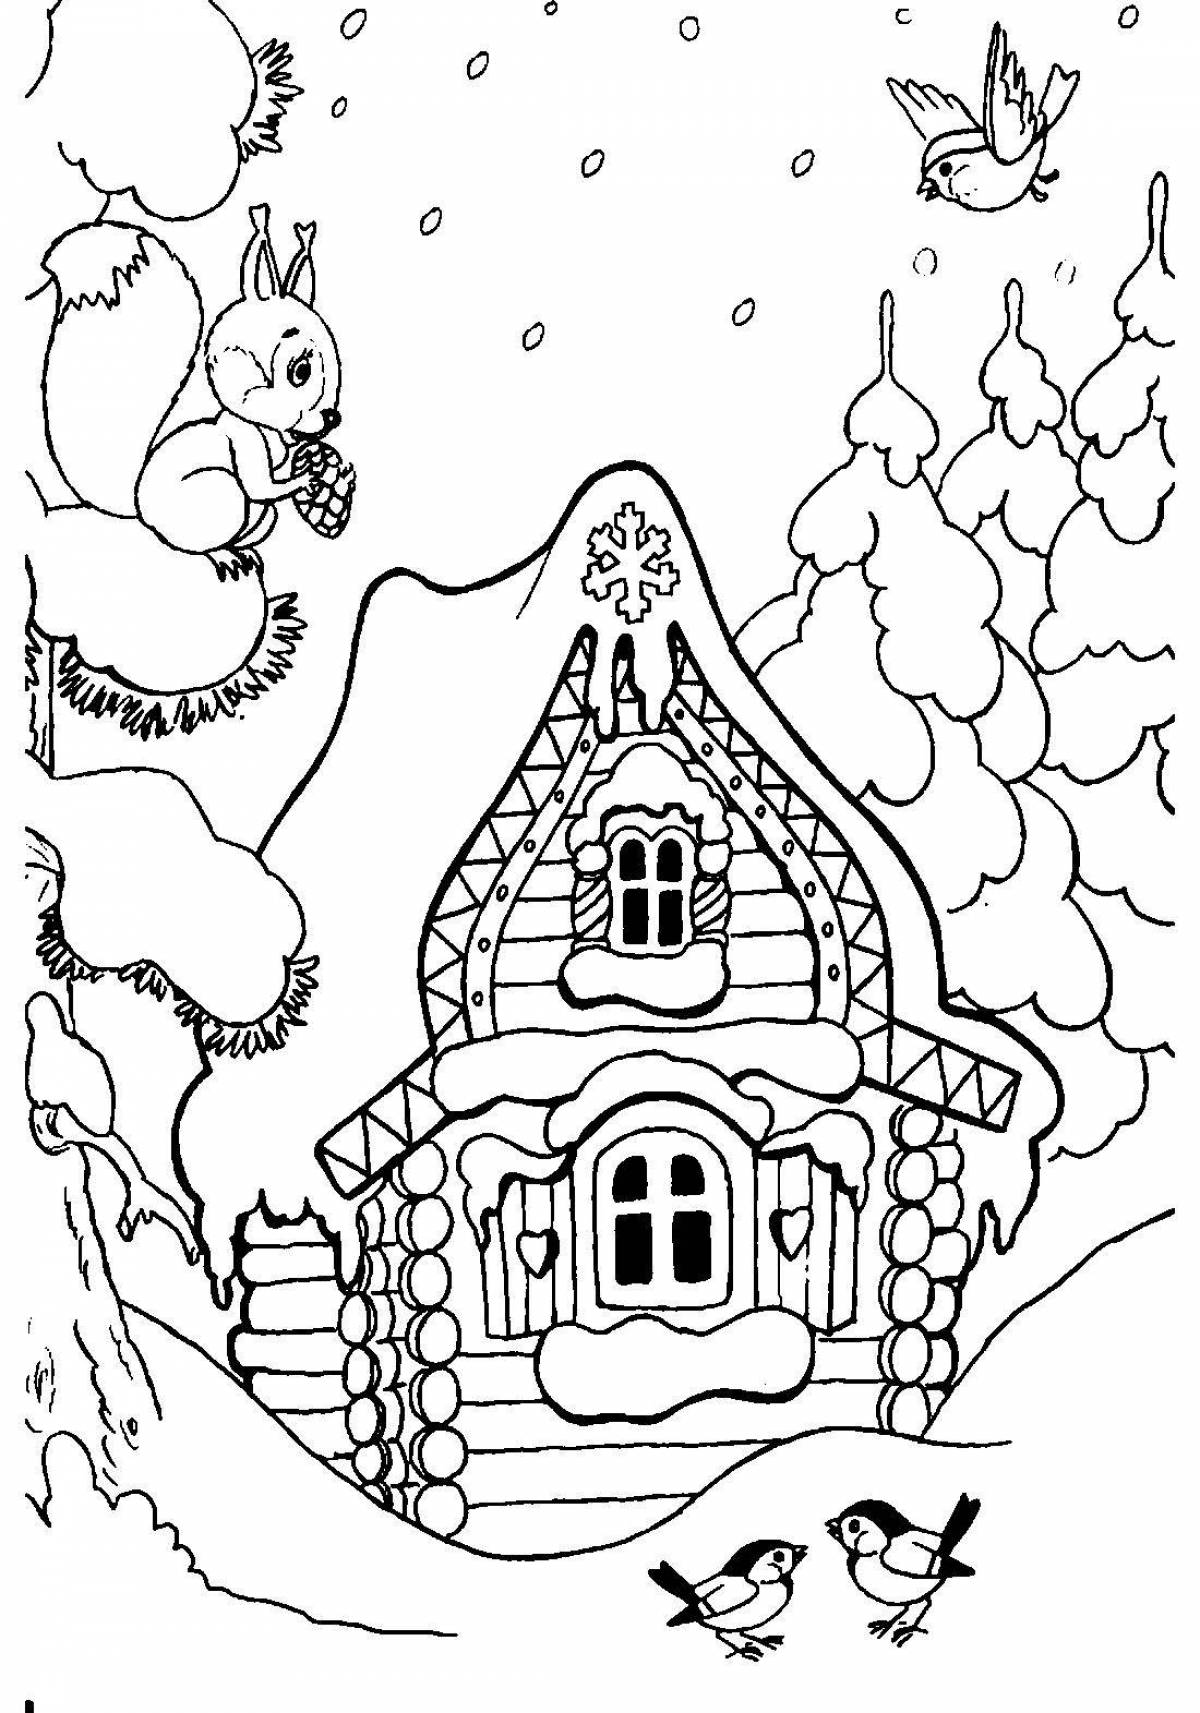 Charming hut coloring book for kids